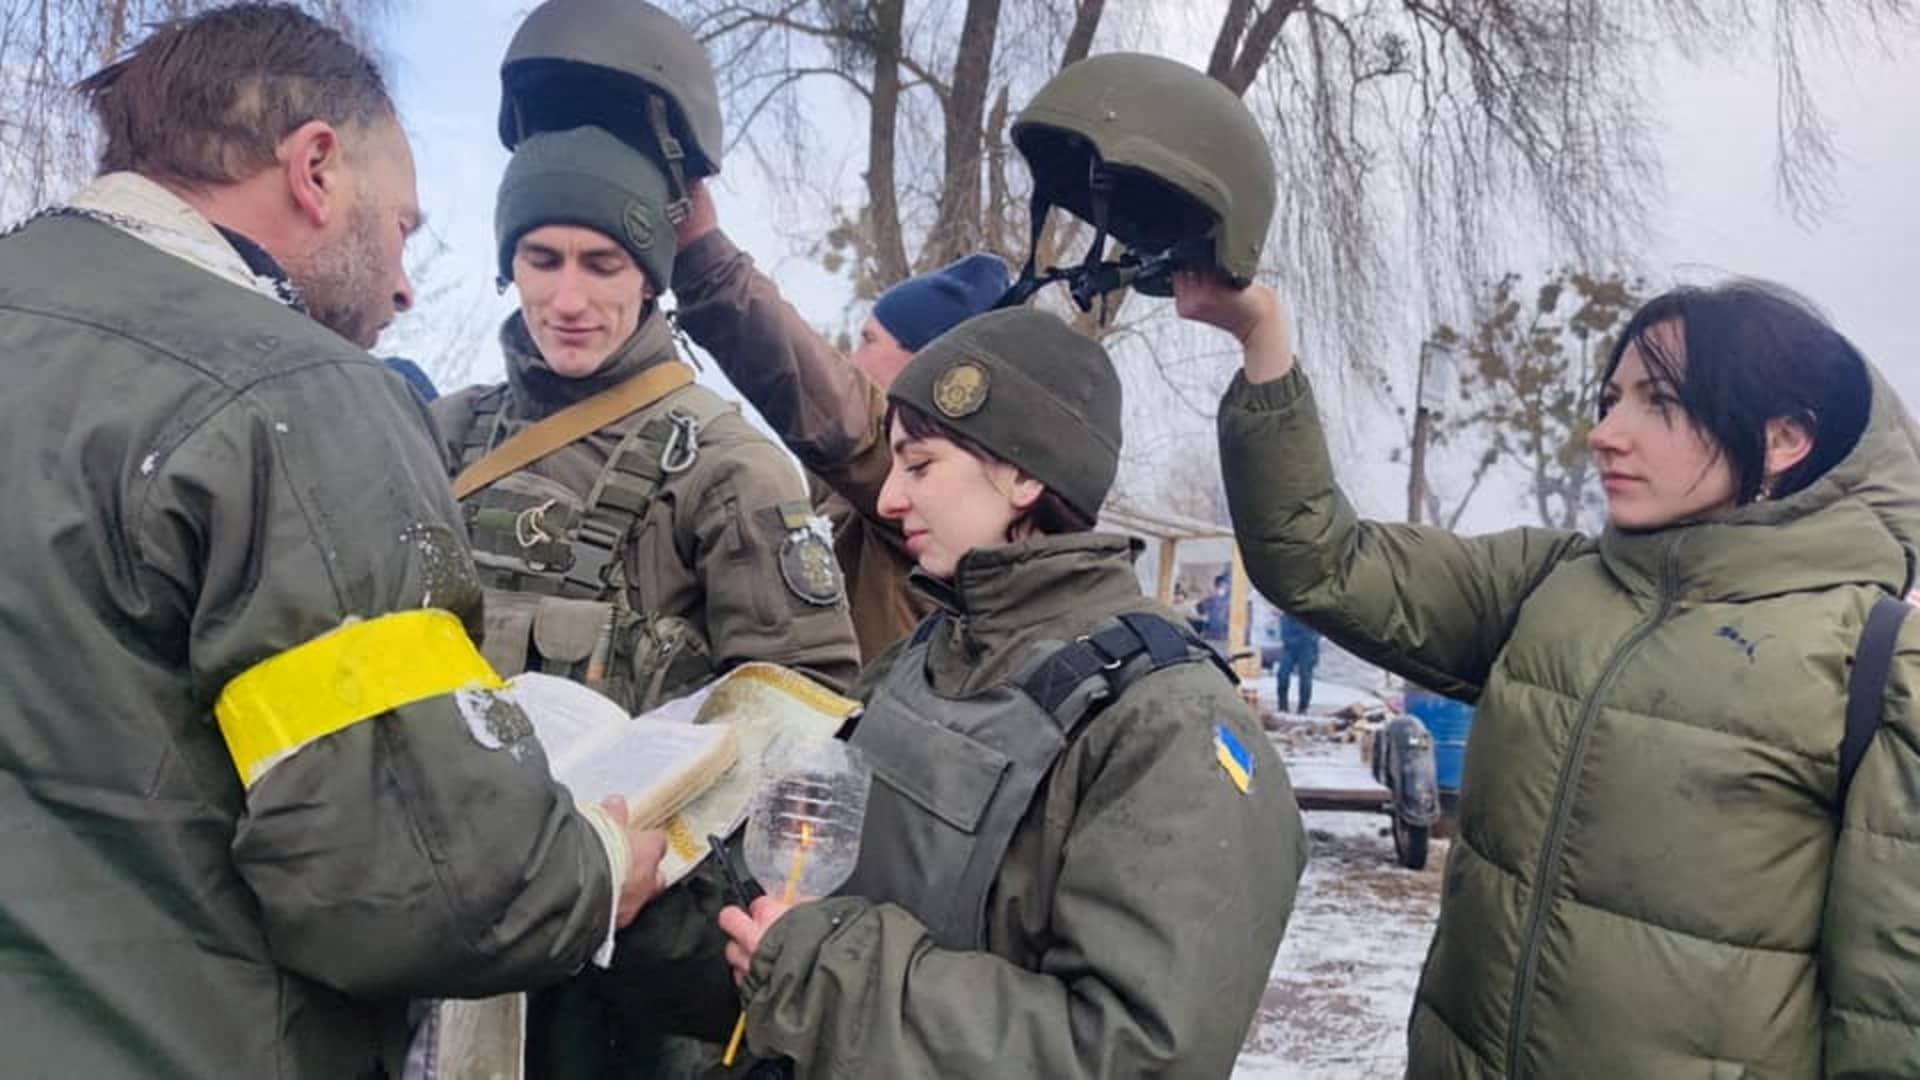 Members of the National Guard of Ukraine Oleksandr and Olena listen to a priest at their wedding during Ukraine-Russia conflict, at a checkpoint in unknown location, in Ukraine, in this handout picture released March 8, 2022.